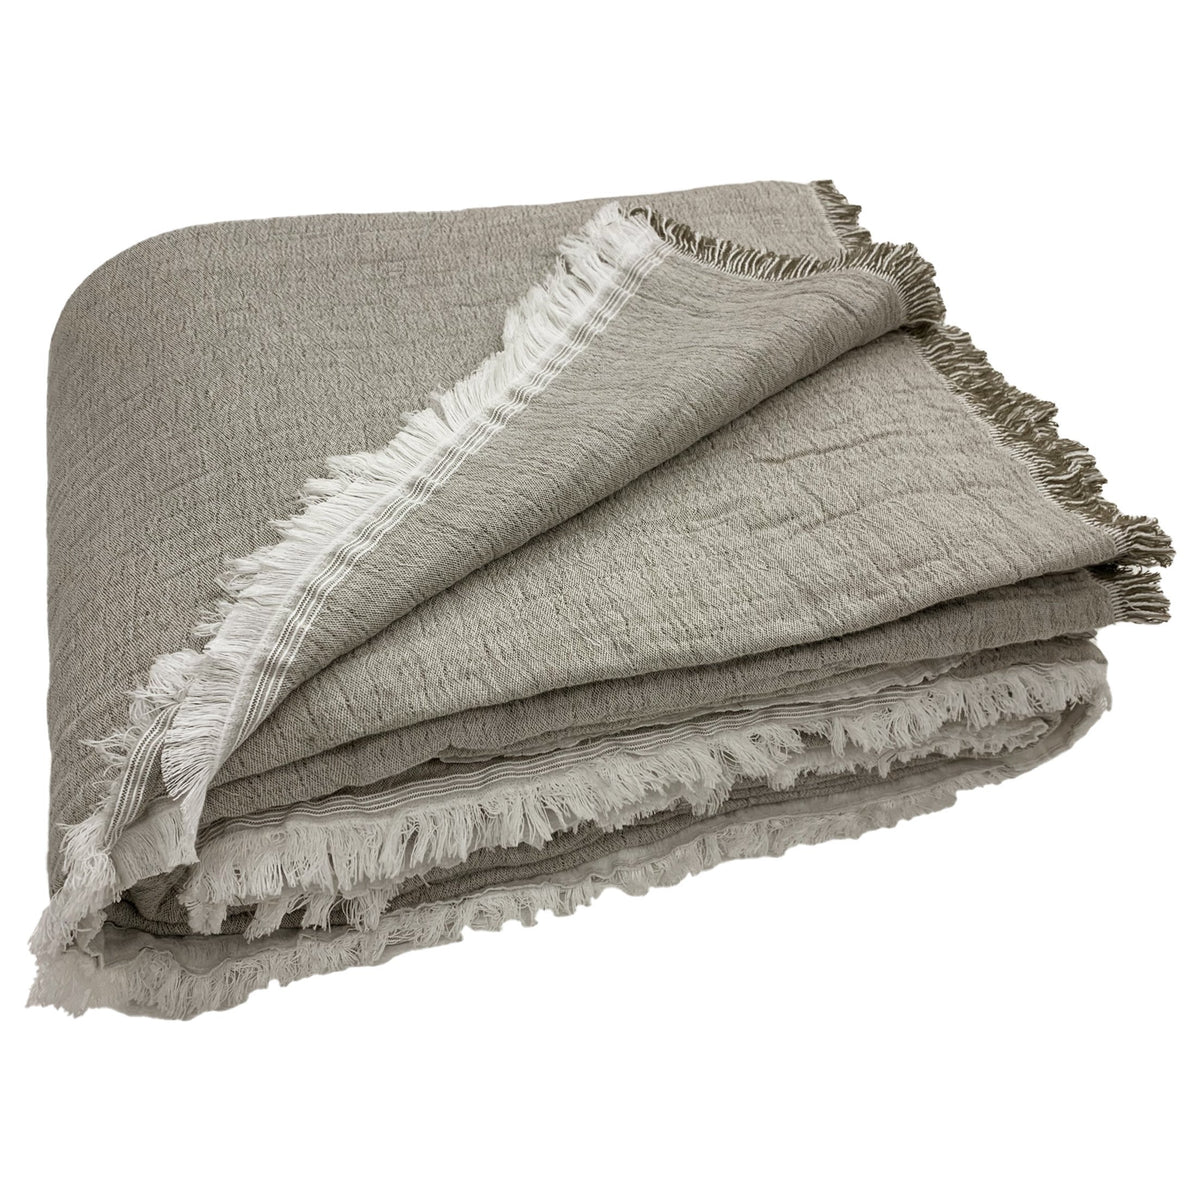 Bedspread in Stonewashed Cotton with Fringes - Mellow